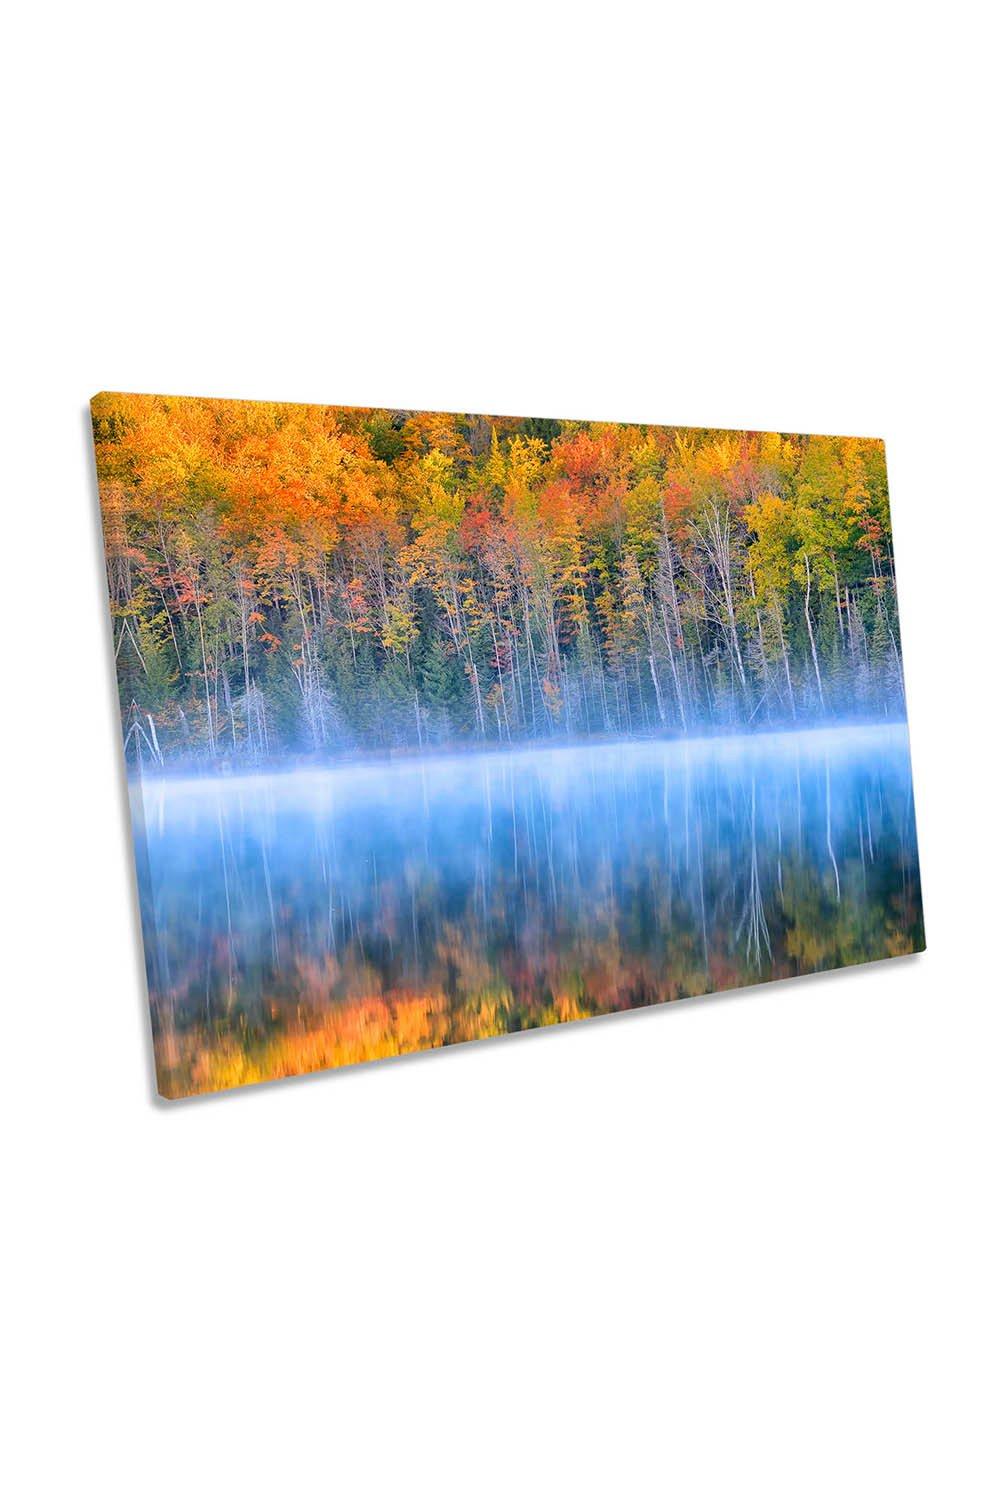 Fall Colours Forest Lake Landscape Canvas Wall Art Picture Print